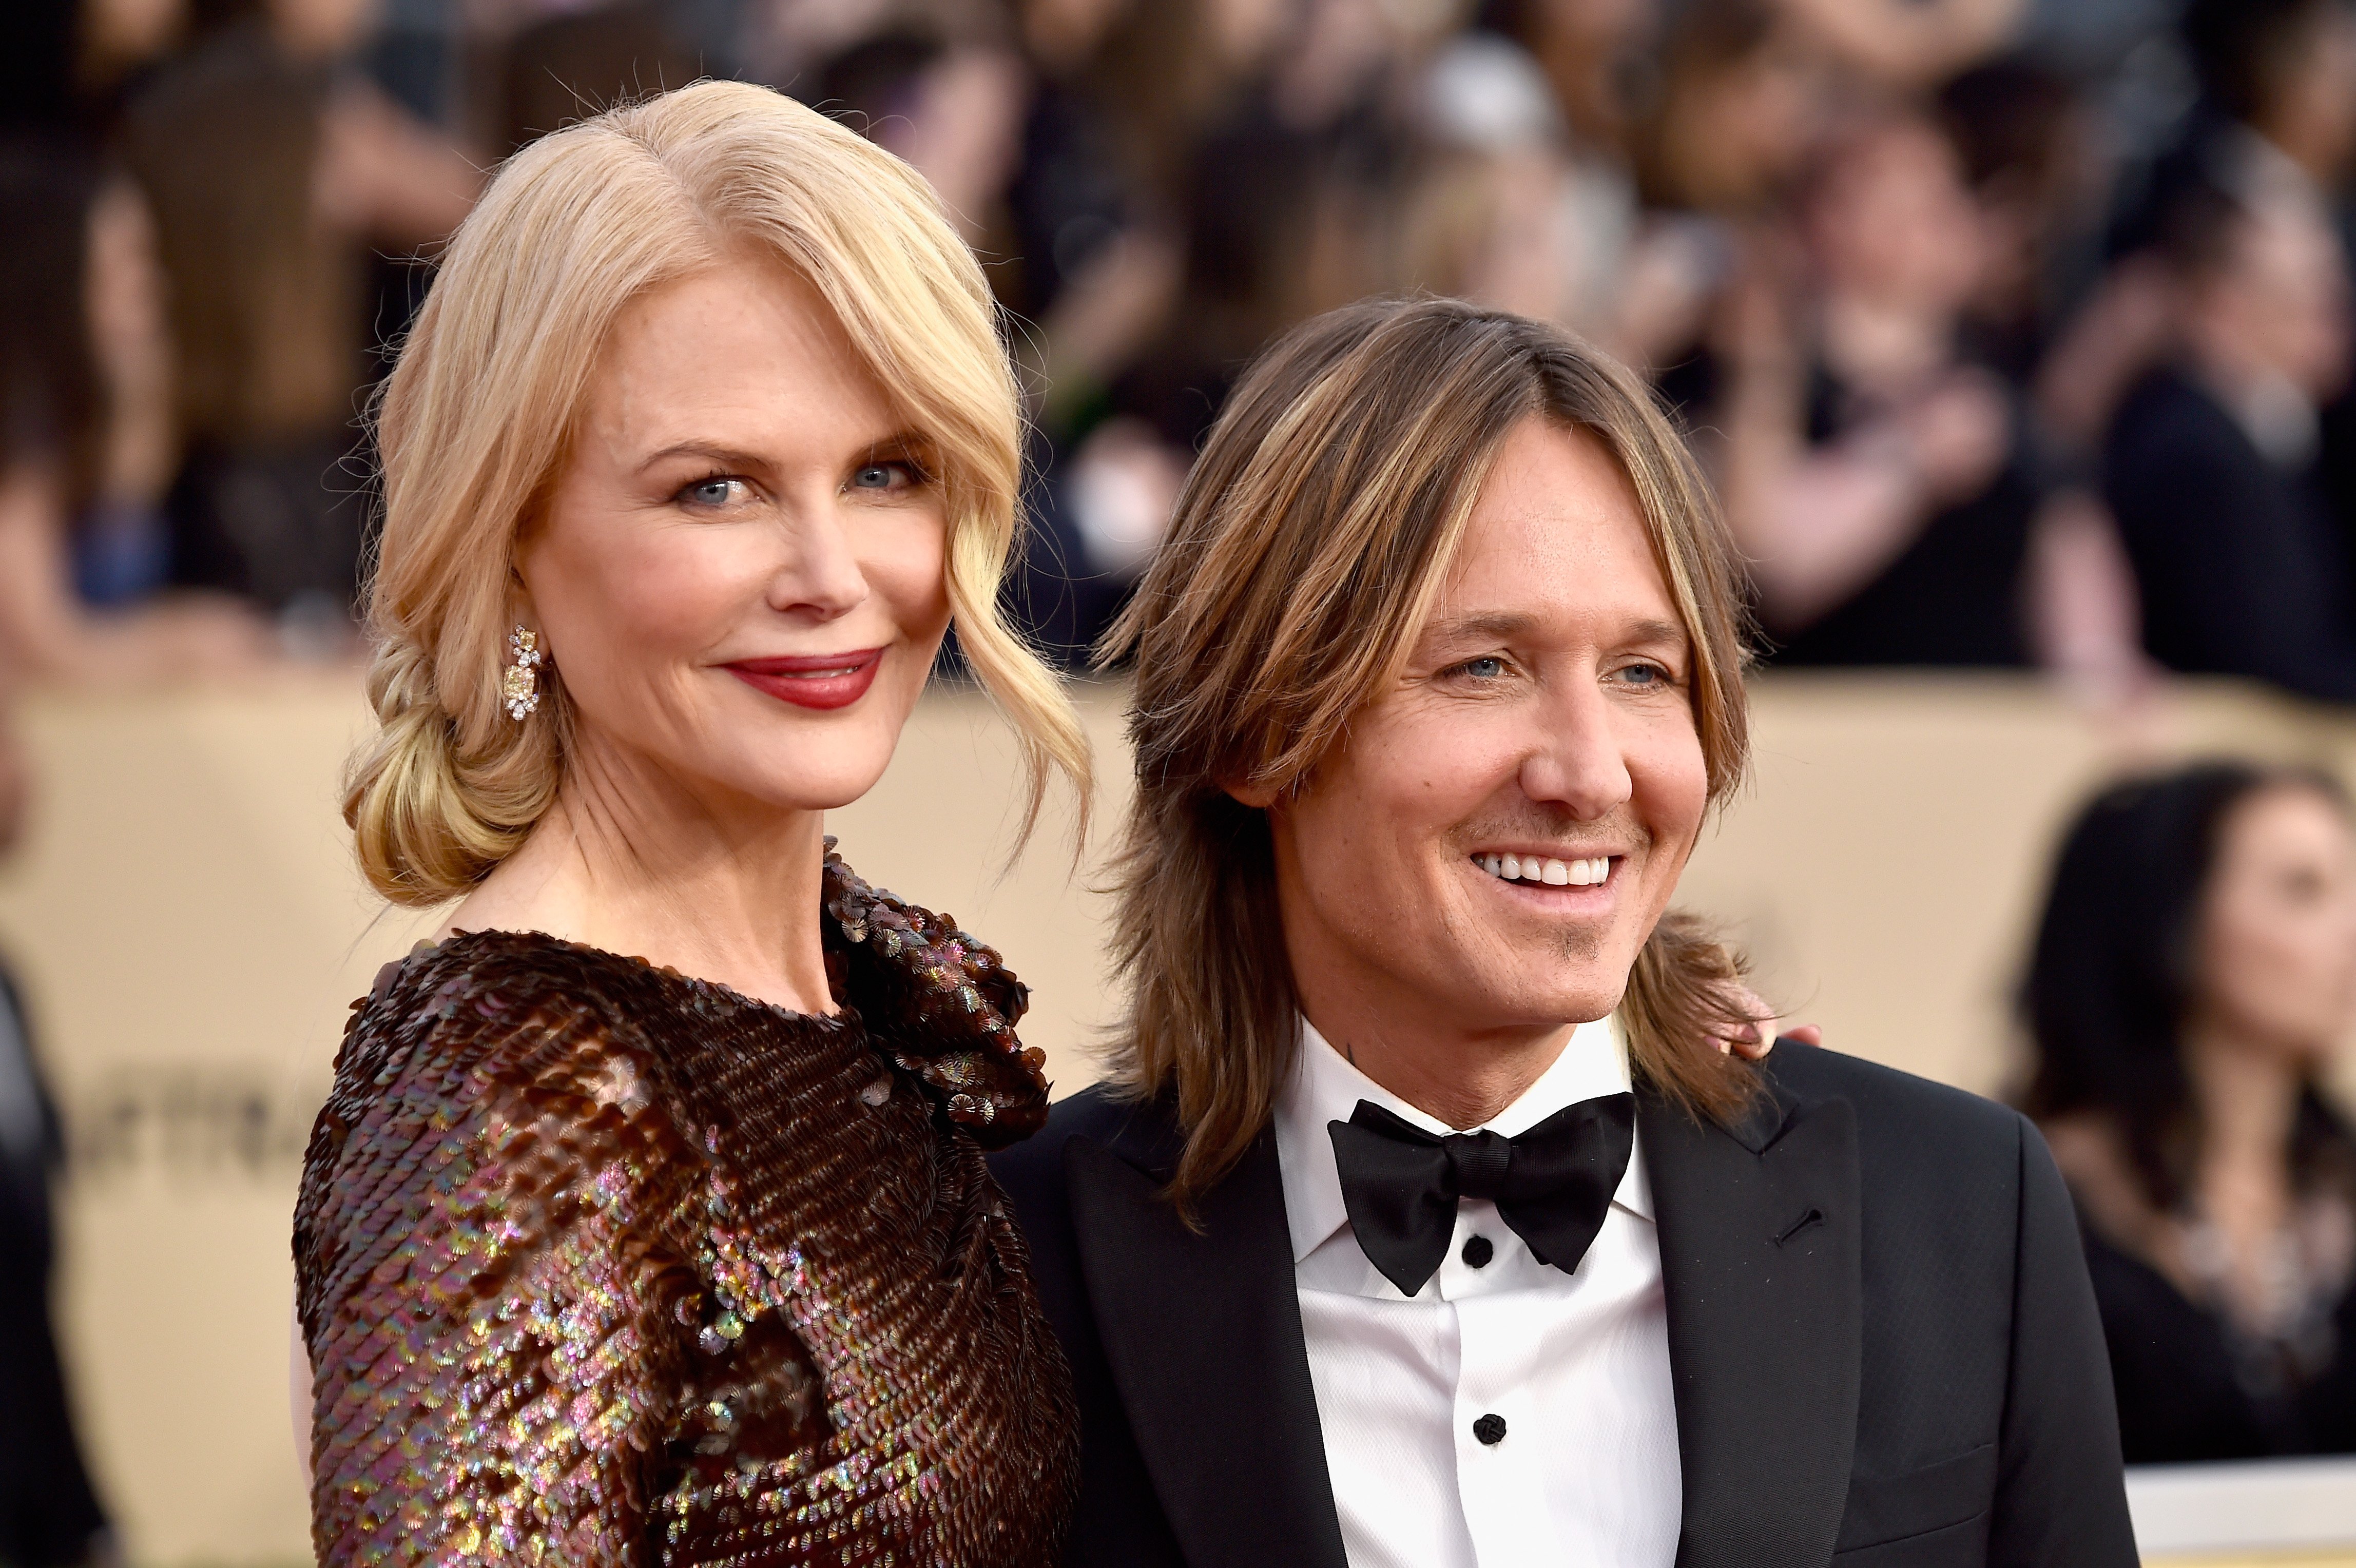 Nicole Kidman and Keith Urban attend the Screen Actors Guild Awards in Los Angeles, California on January 21, 2018 | Photo: Getty Images